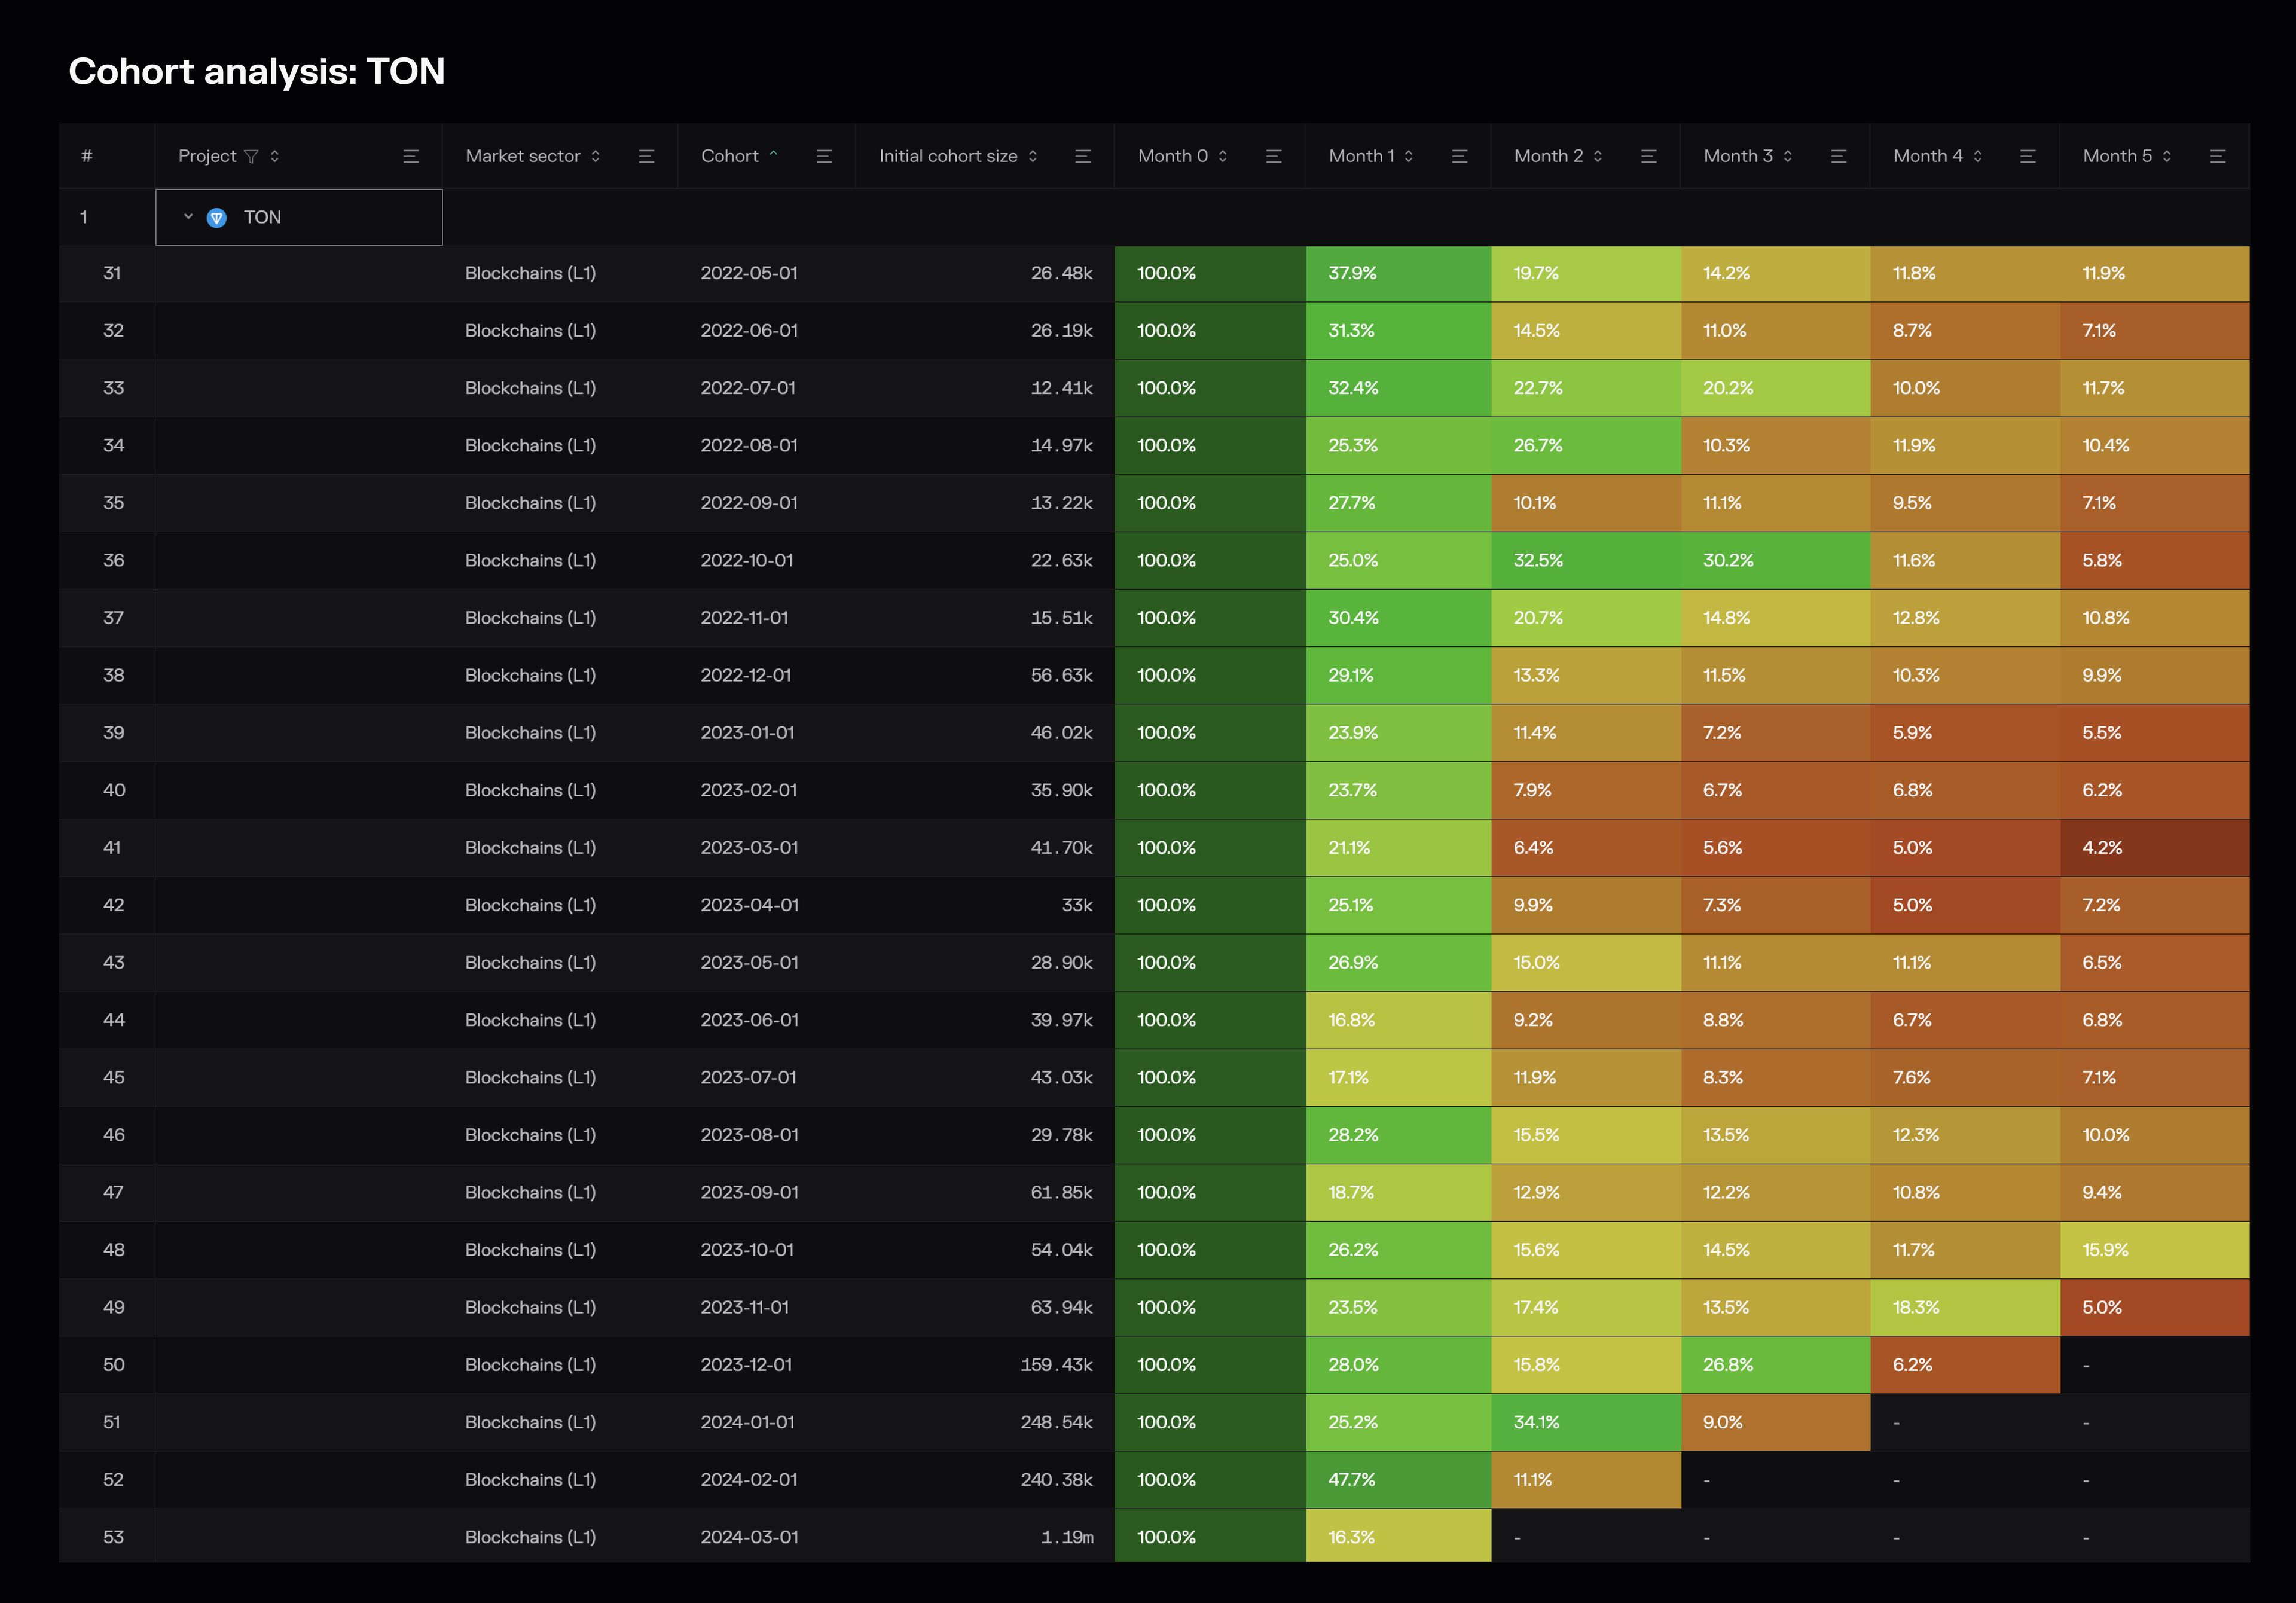 Cohort analysis (retention rates) of monthly active users on TON.